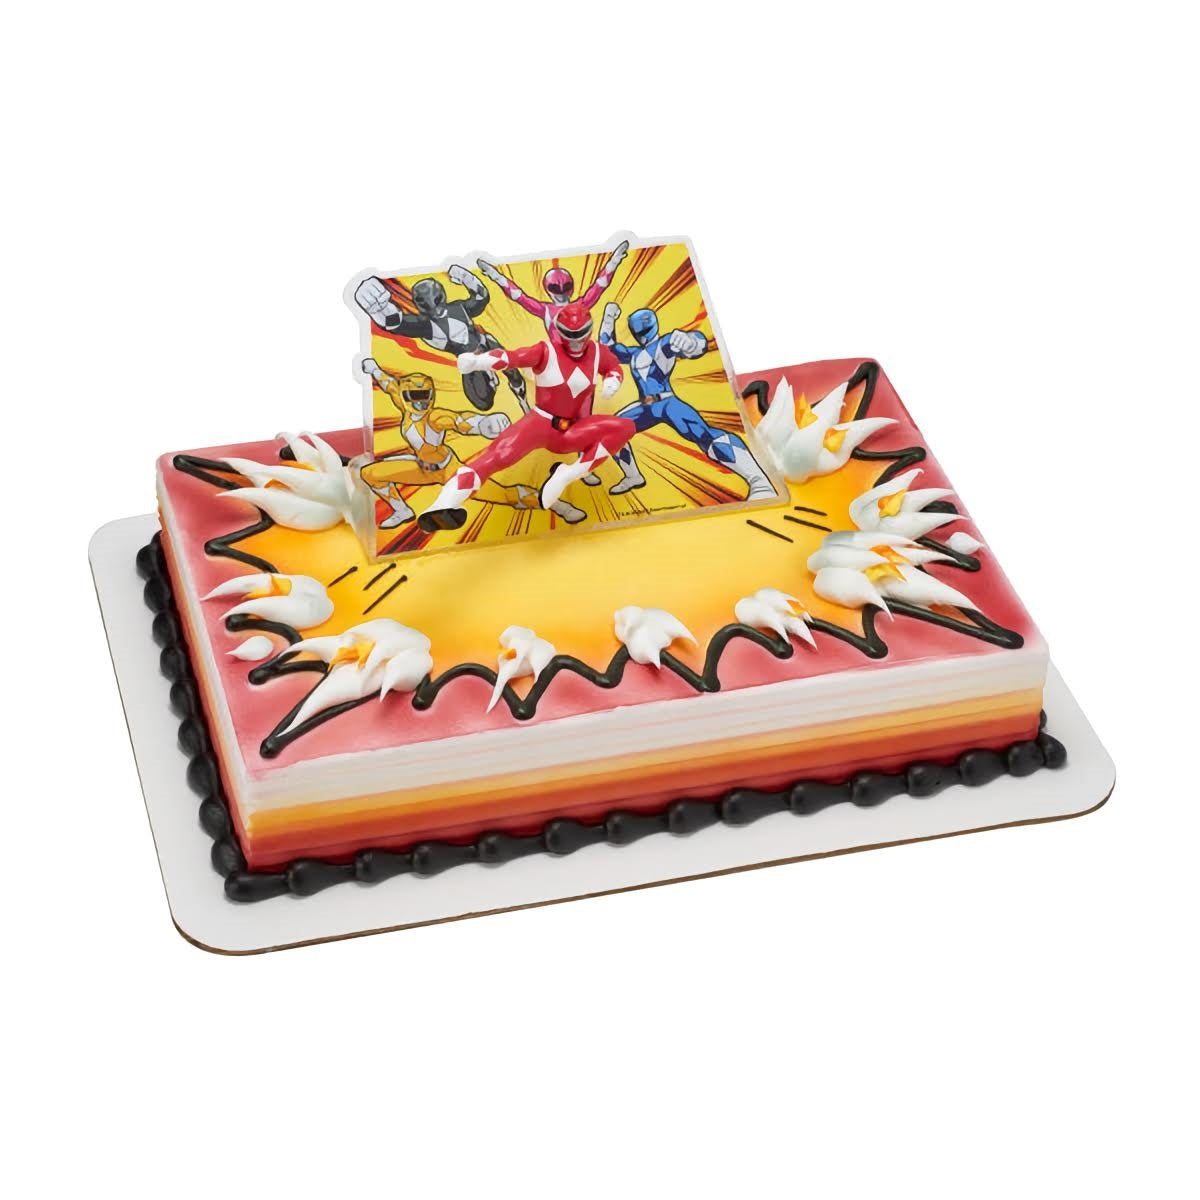 A vibrant rectangular cake with a cake topper depicting the power rangers in action, framed by fondant explosions and a gradient of yellow to red hues, edged with a black border.